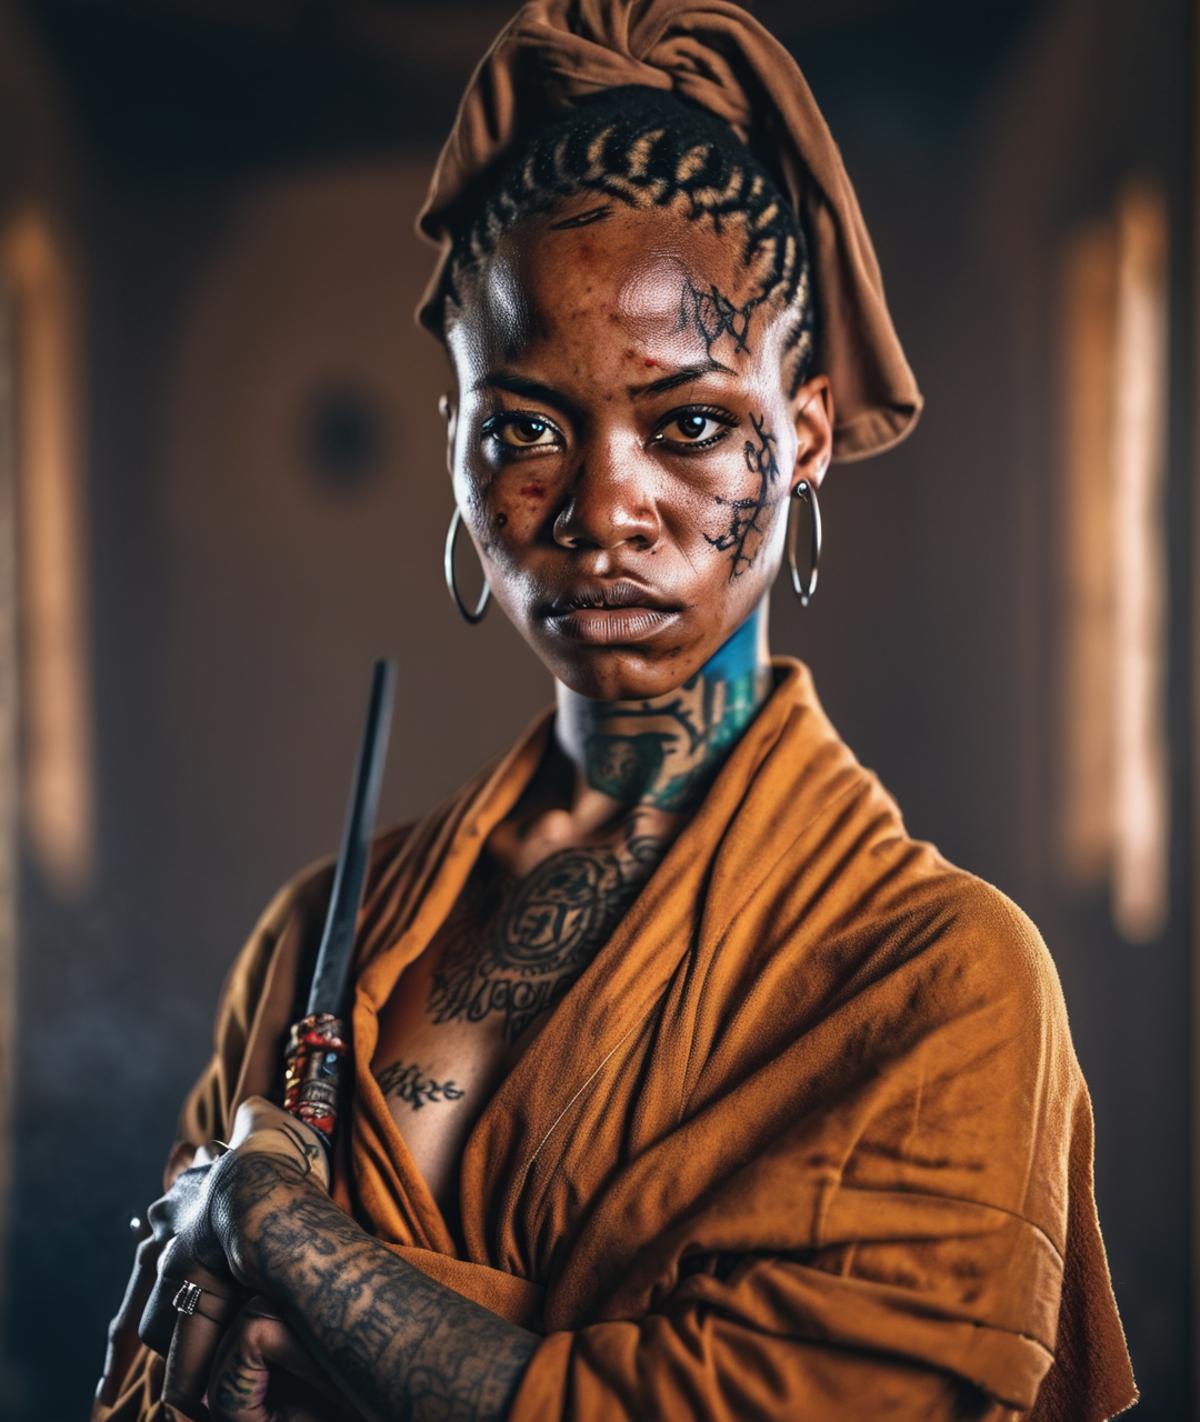 A woman with tattoos and a scar on her face, wearing a brown shawl and holding a wand, poses in front of a wall.